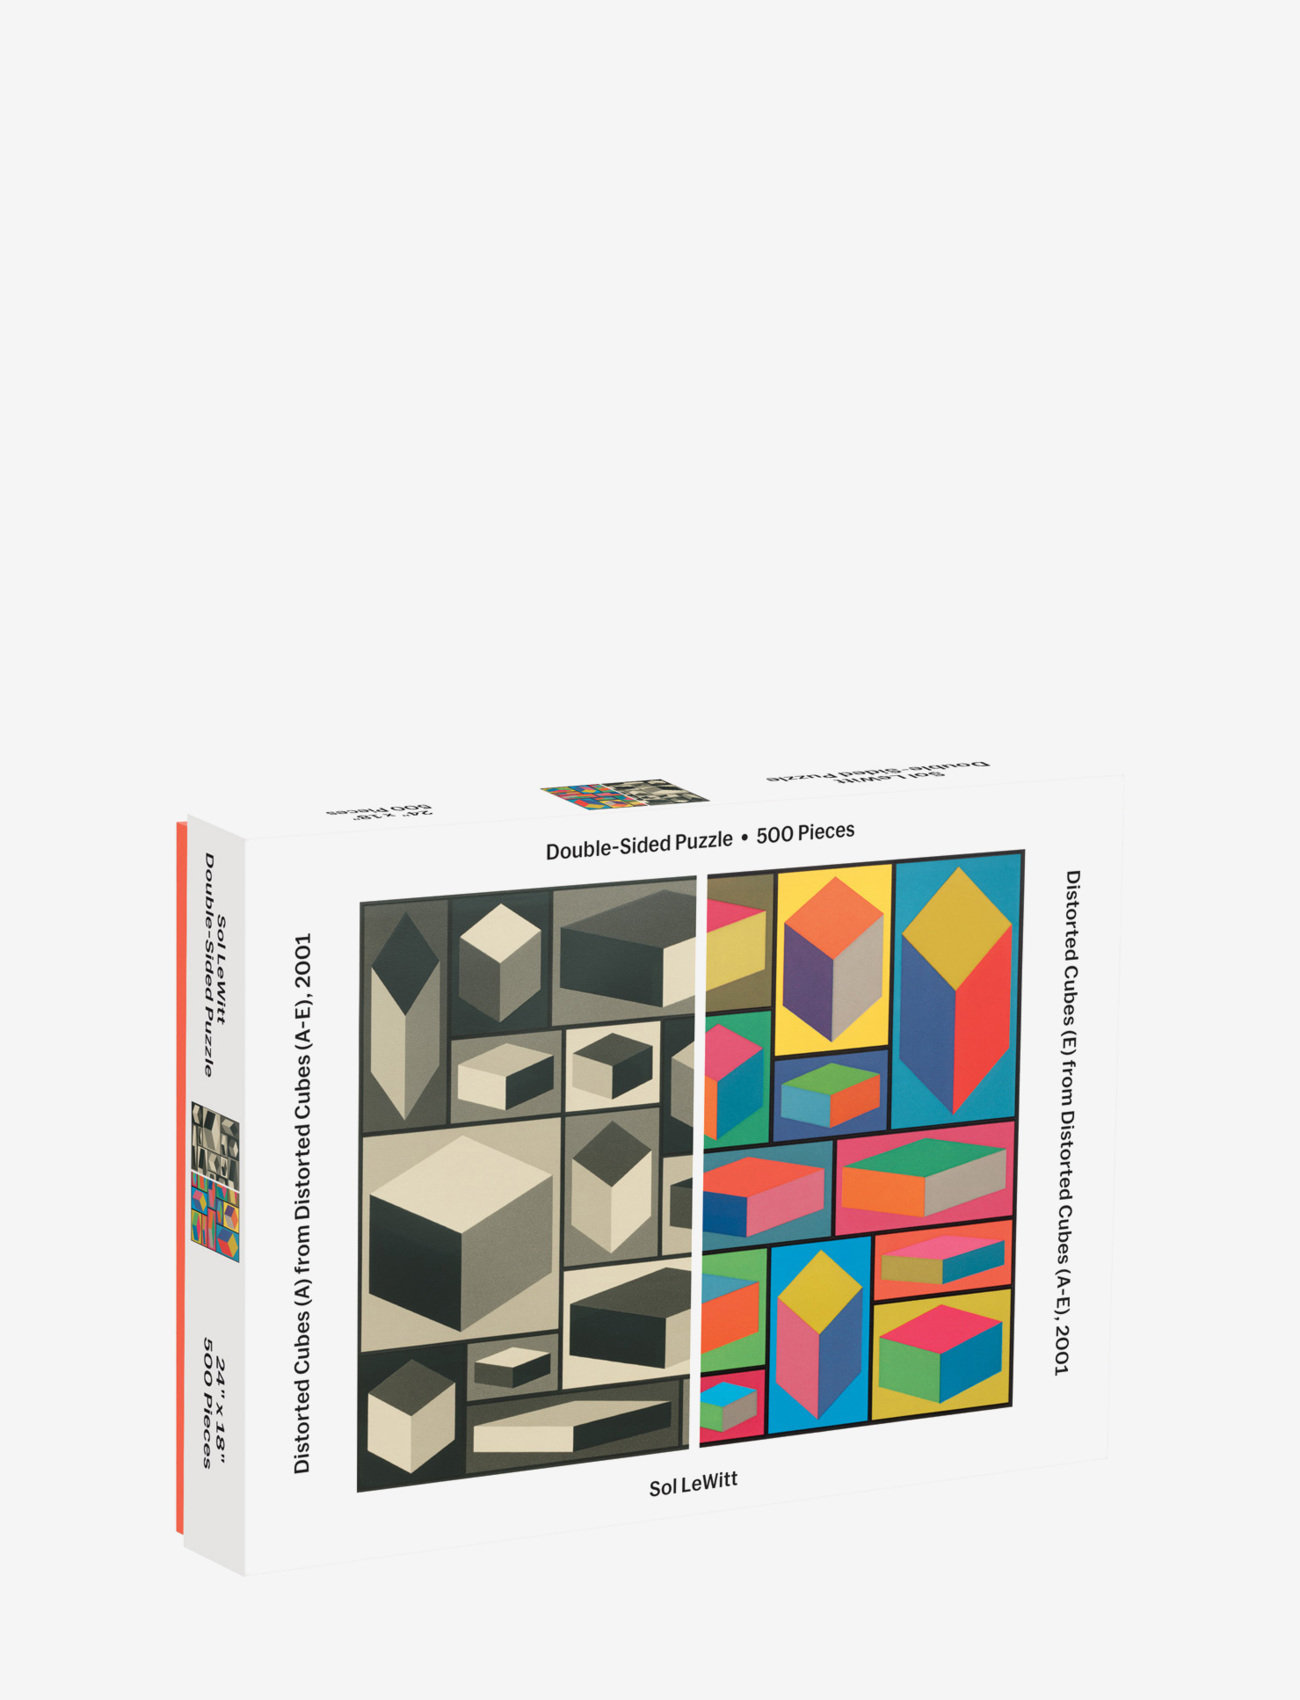 New Mags - Moma Sol Lewitt 2 Sided Puzzle - mažiausios kainos - multicolor - 0